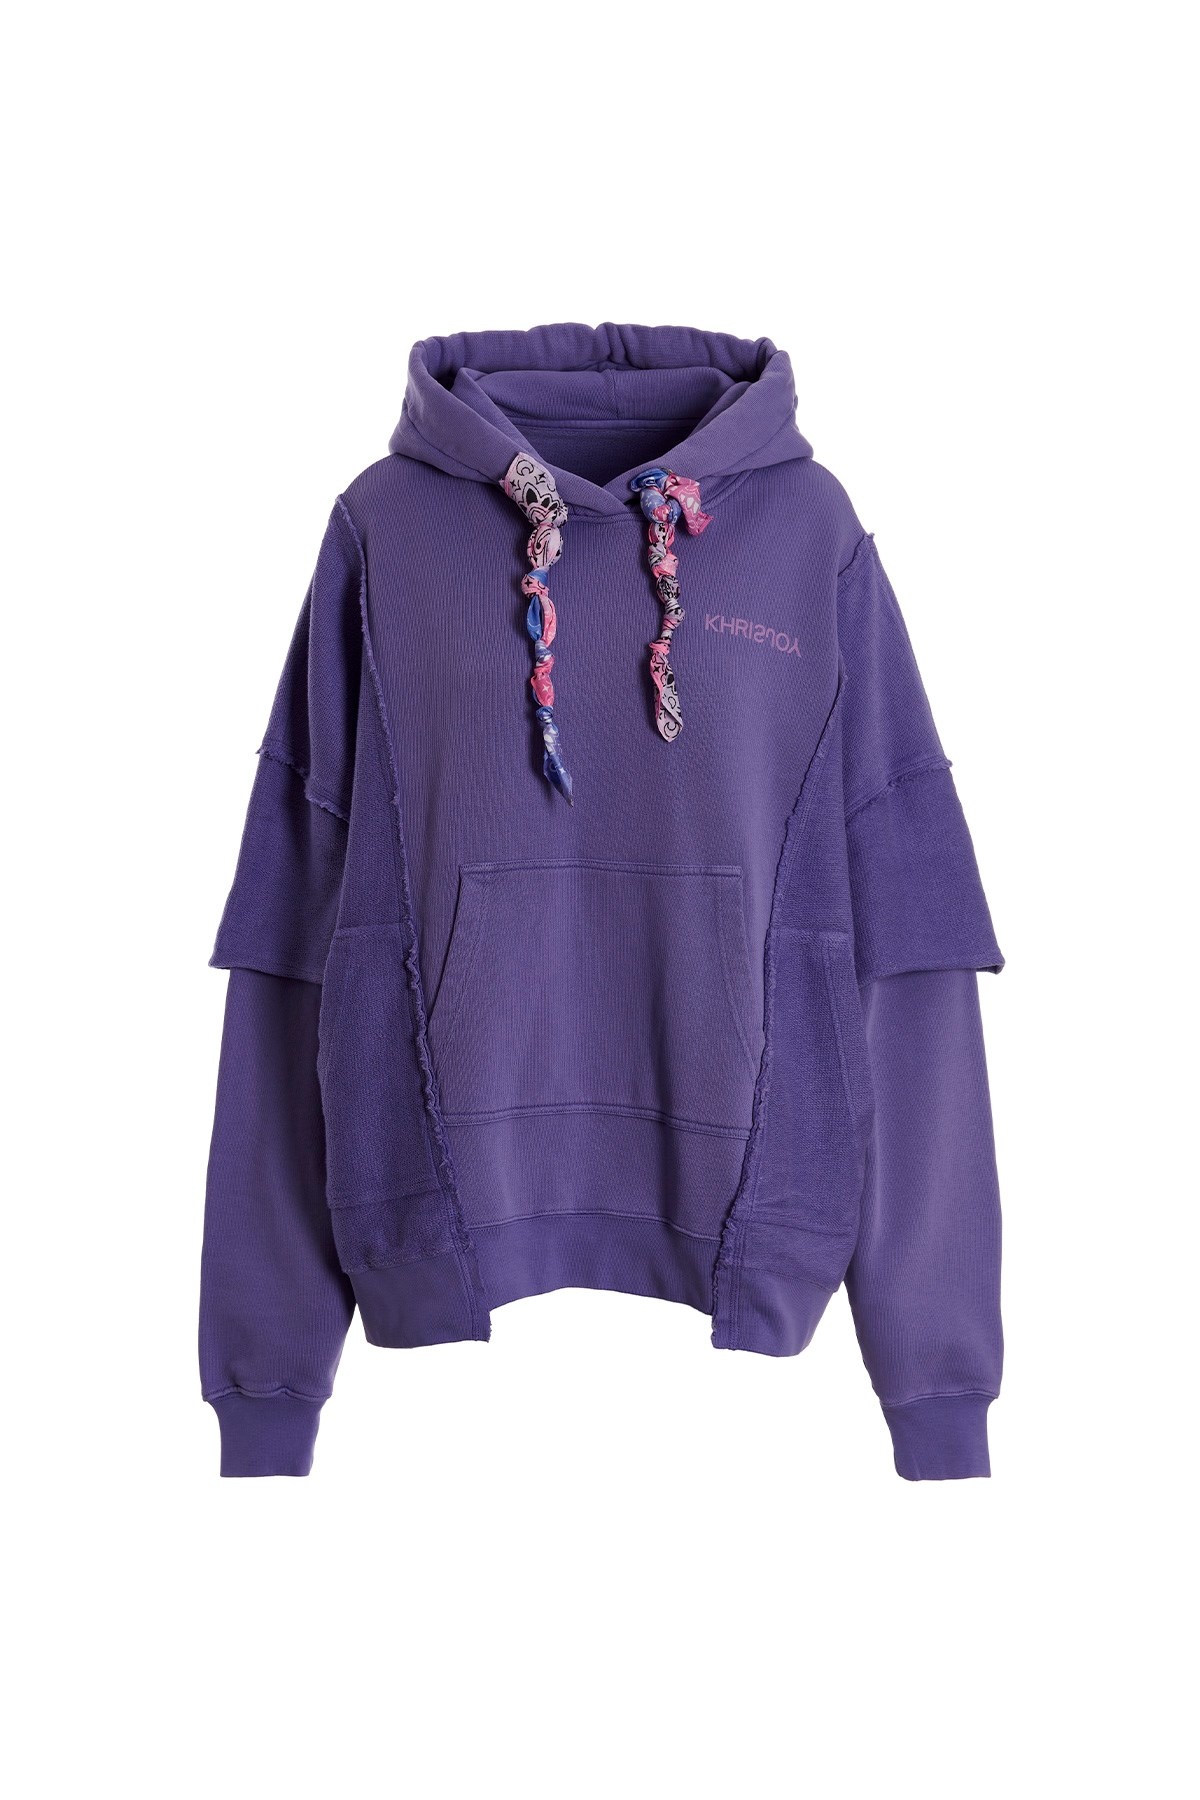 'Double Pockets' hoodie - 1